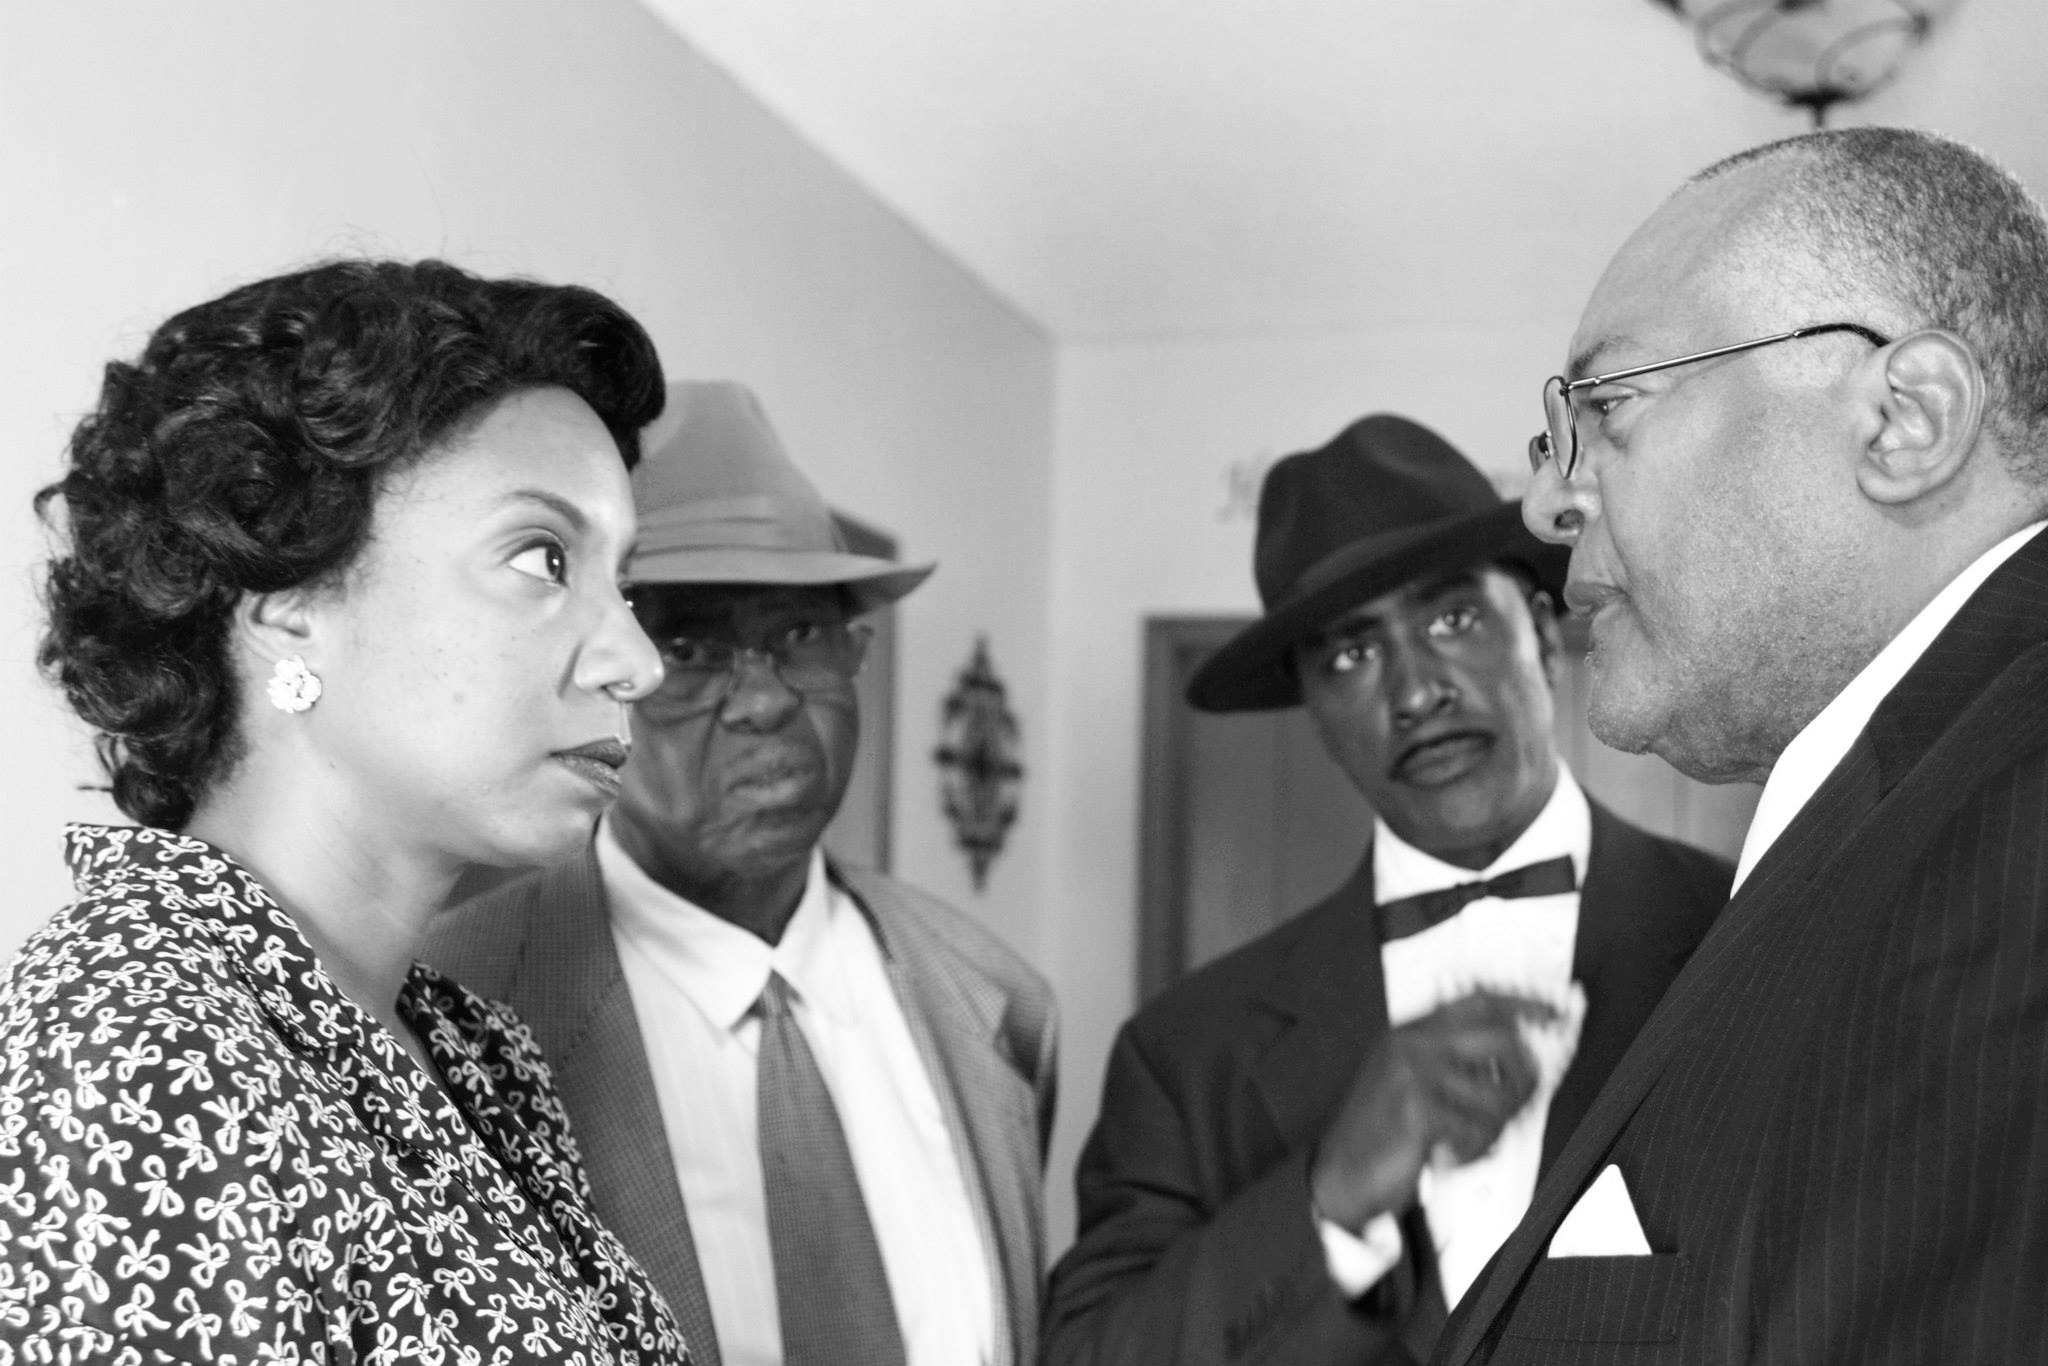 Actress Nakia Seacrest, Actor Marion Burton, Actor Idrees Degas and Actor Michael Delon in The Perfect Sacrifice.Directed by Tiffany Littlejohn